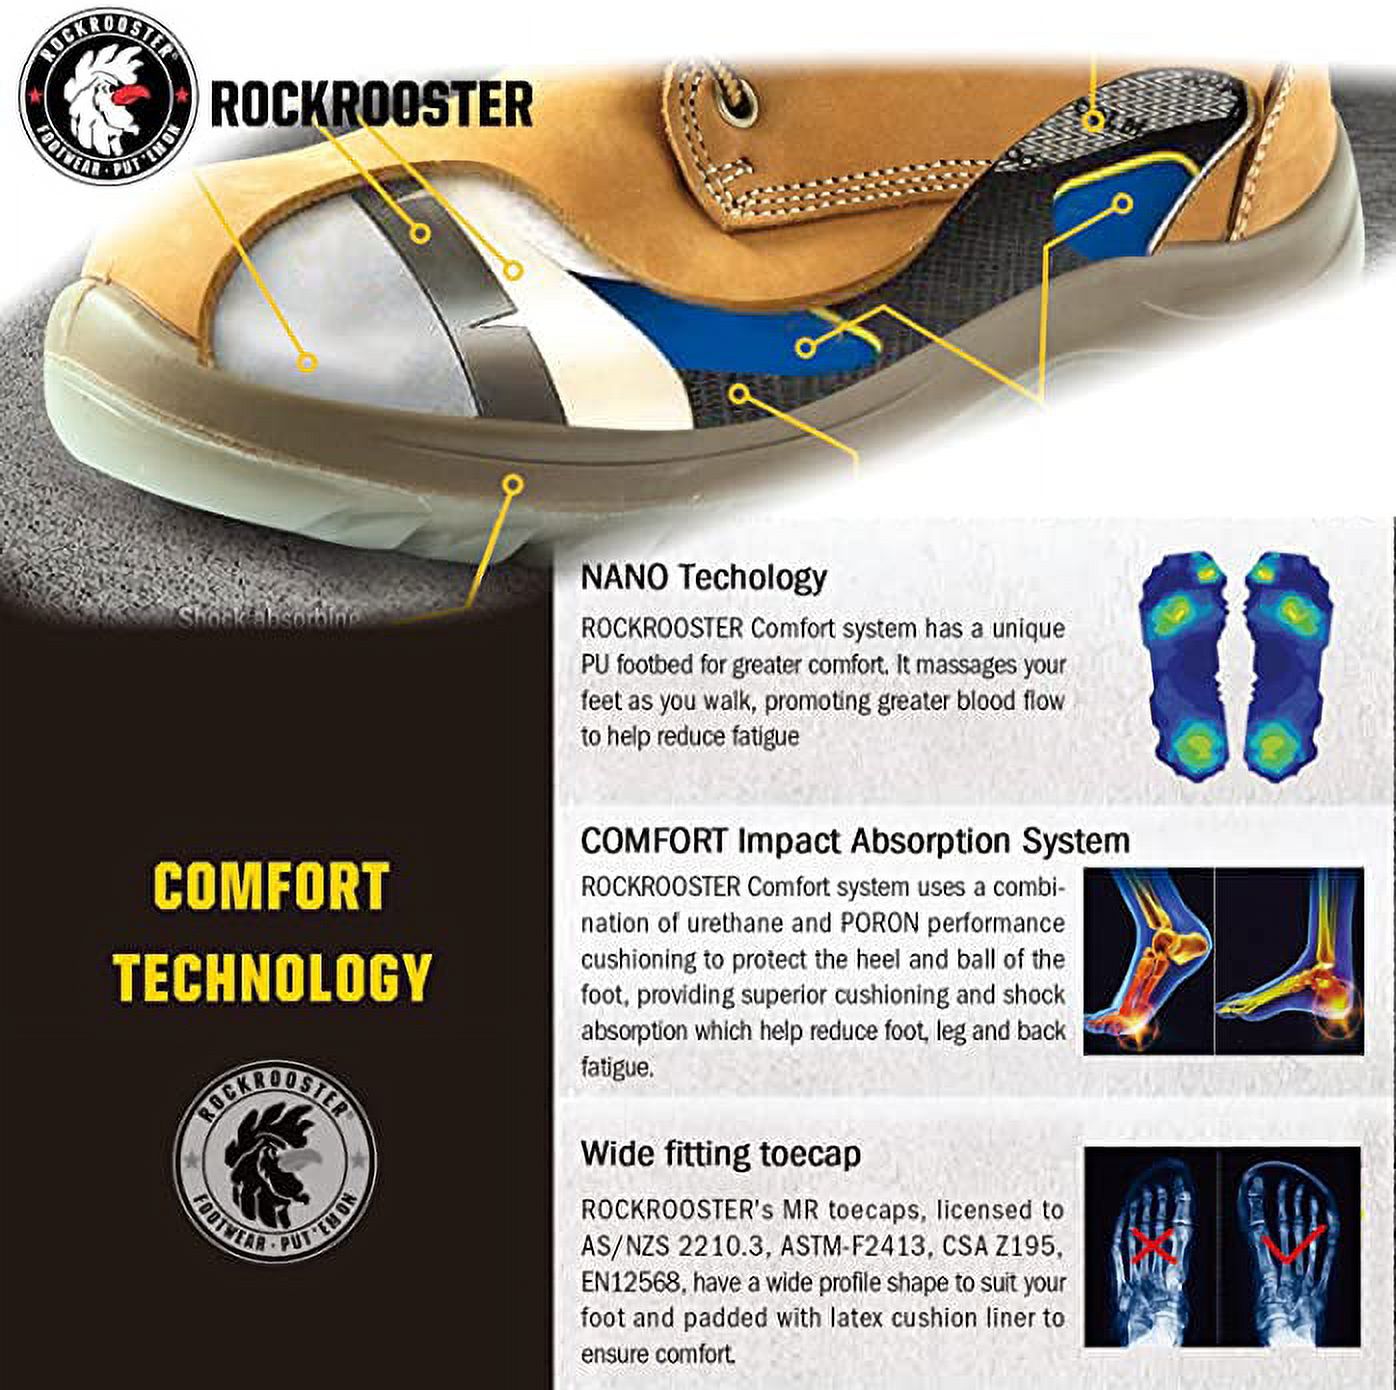 ROCKROOSTER Work Boots for Men, 6 inch Steel Toe, Slip On Safety Oiled Leather Shoes, Static Dissipative, Breathable, Quick Dry AK227-9.5 - image 5 of 6